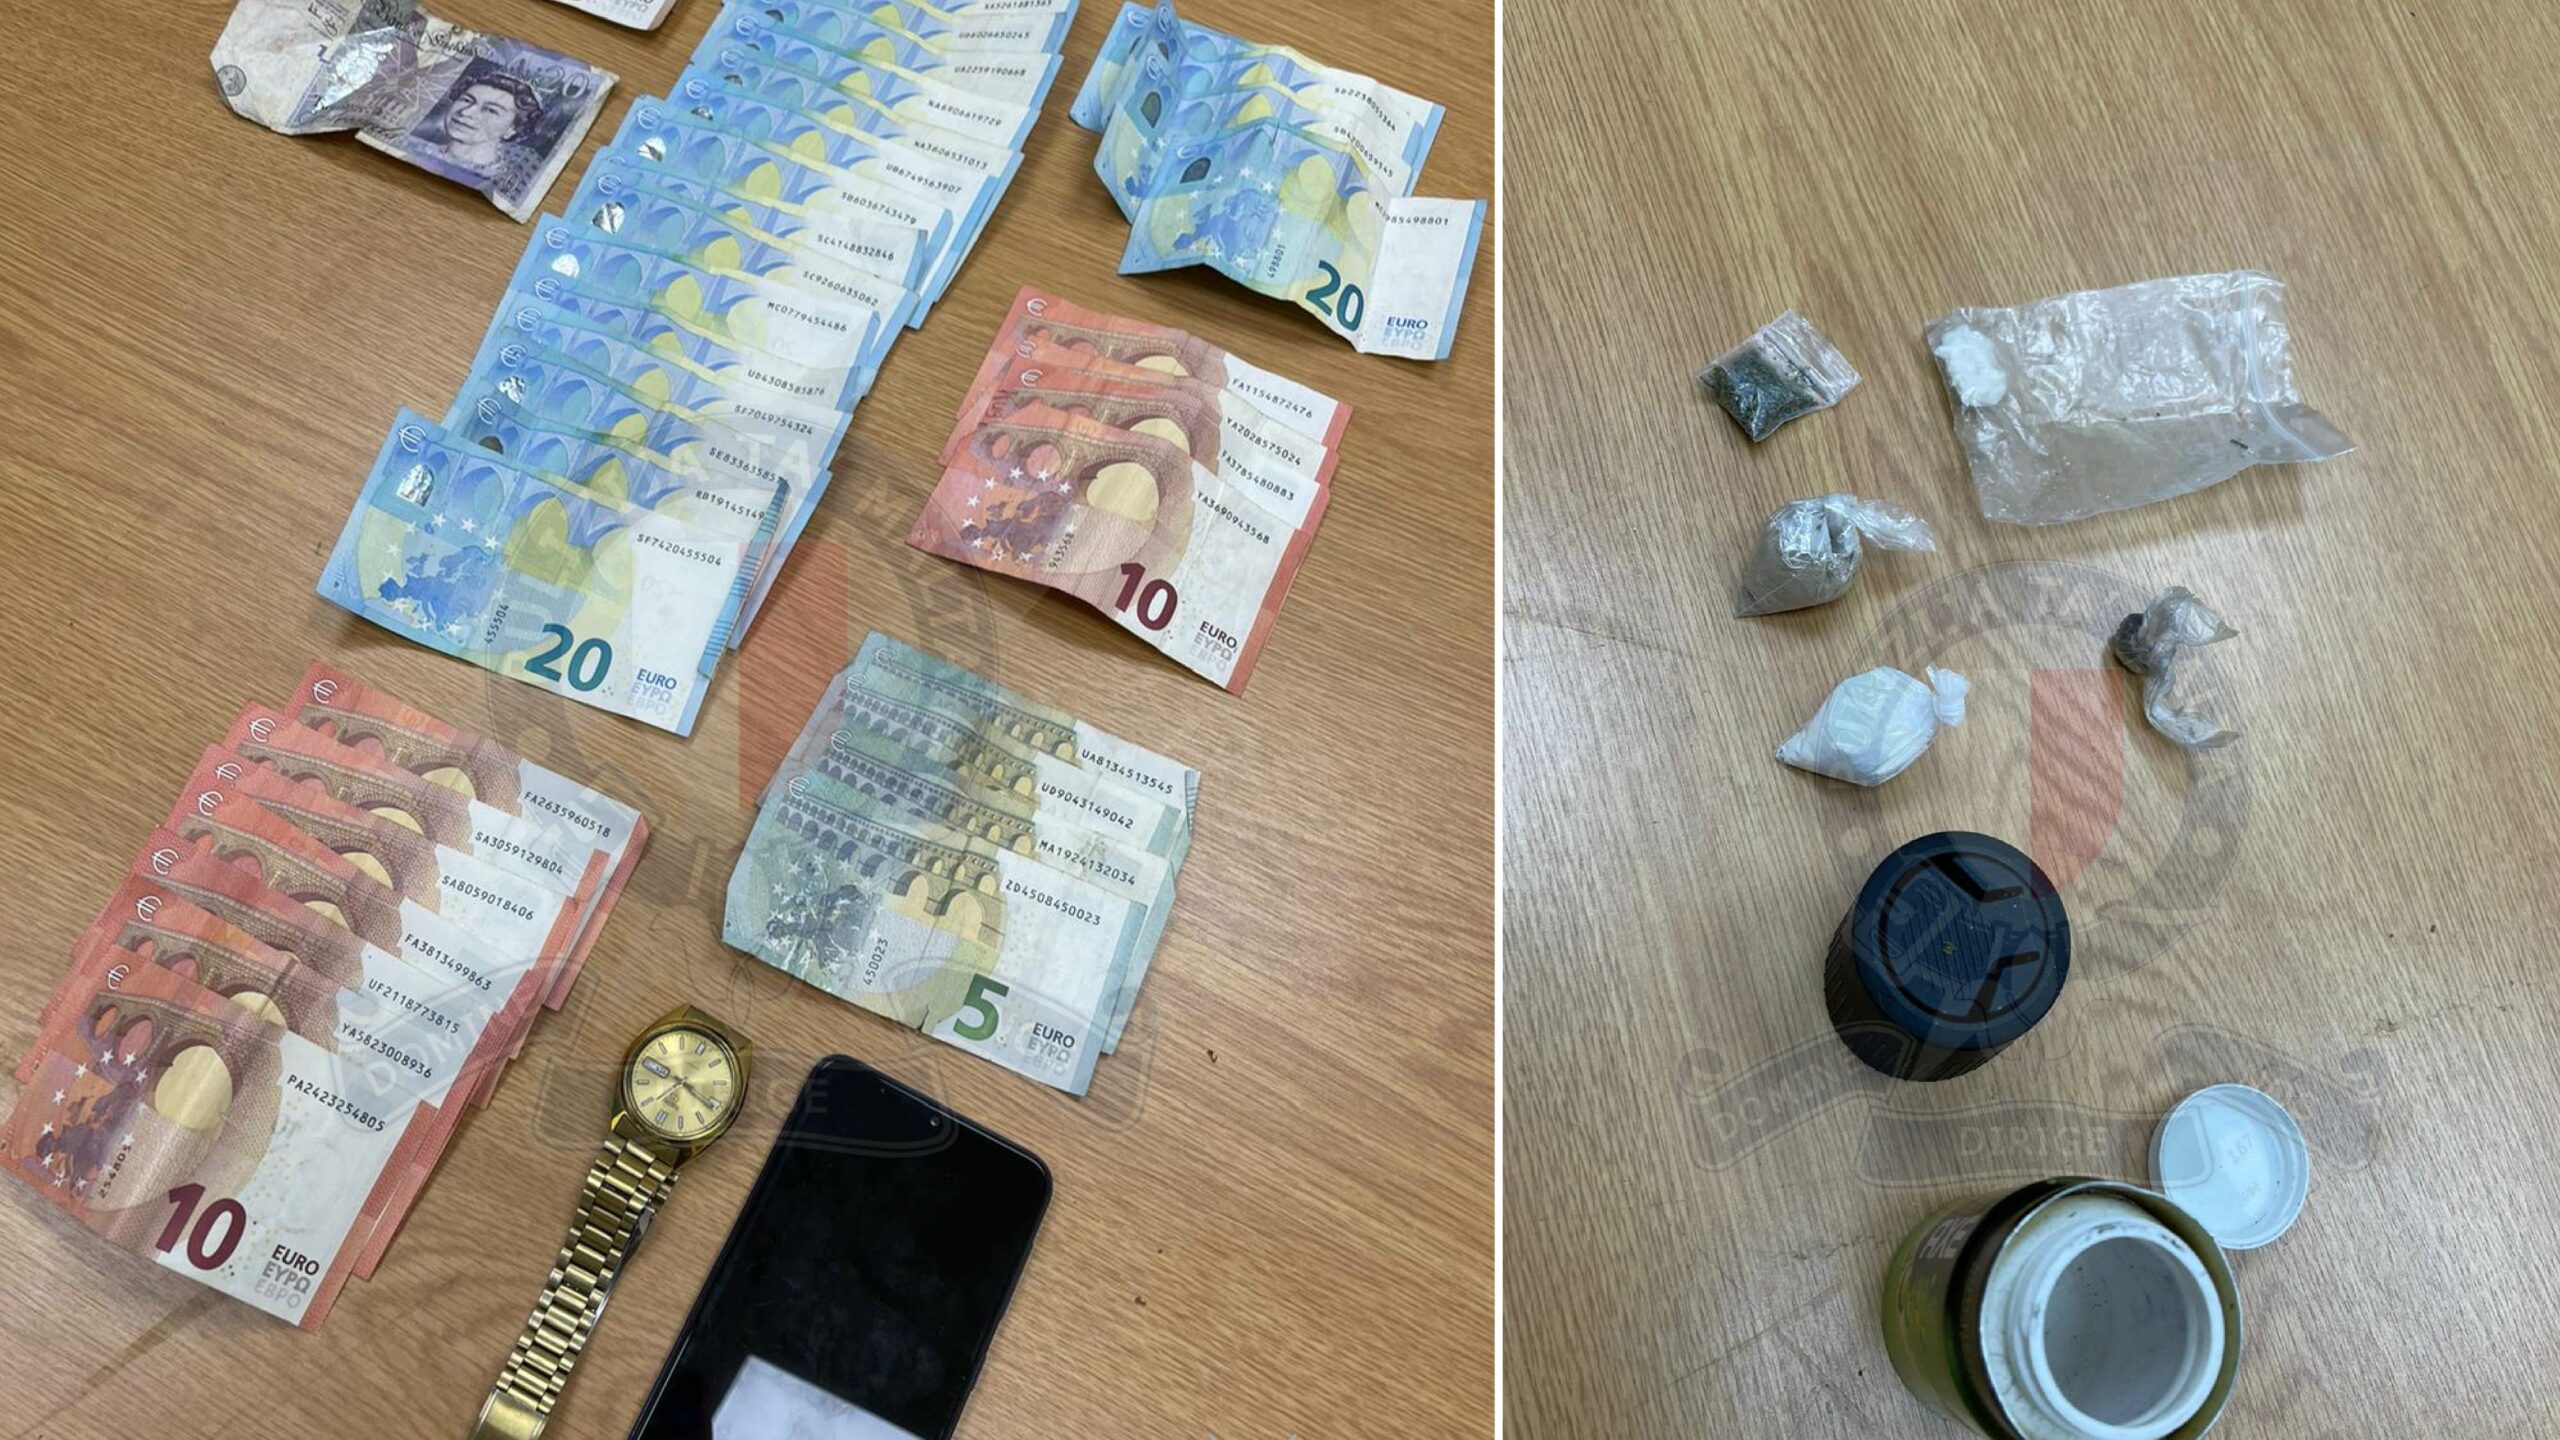 35-year-old man from Marsa arrested on drug trafficking charges